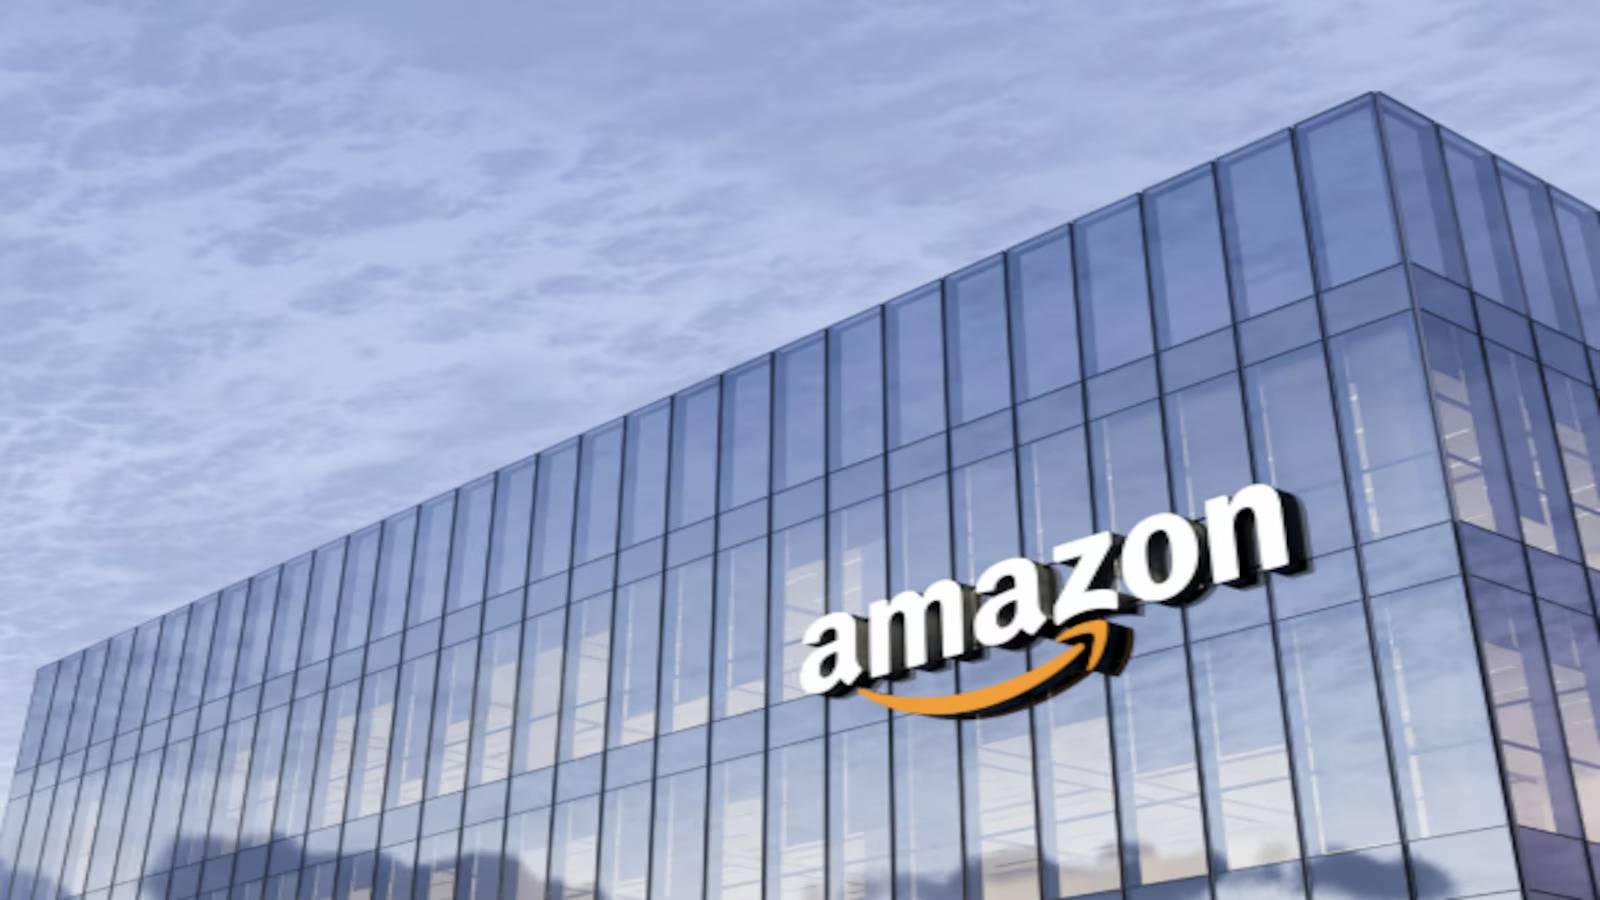 Amazon Leases Around 8 Lakh Sq Ft Office Space in Hyderabad and Gurgaon for Five Years